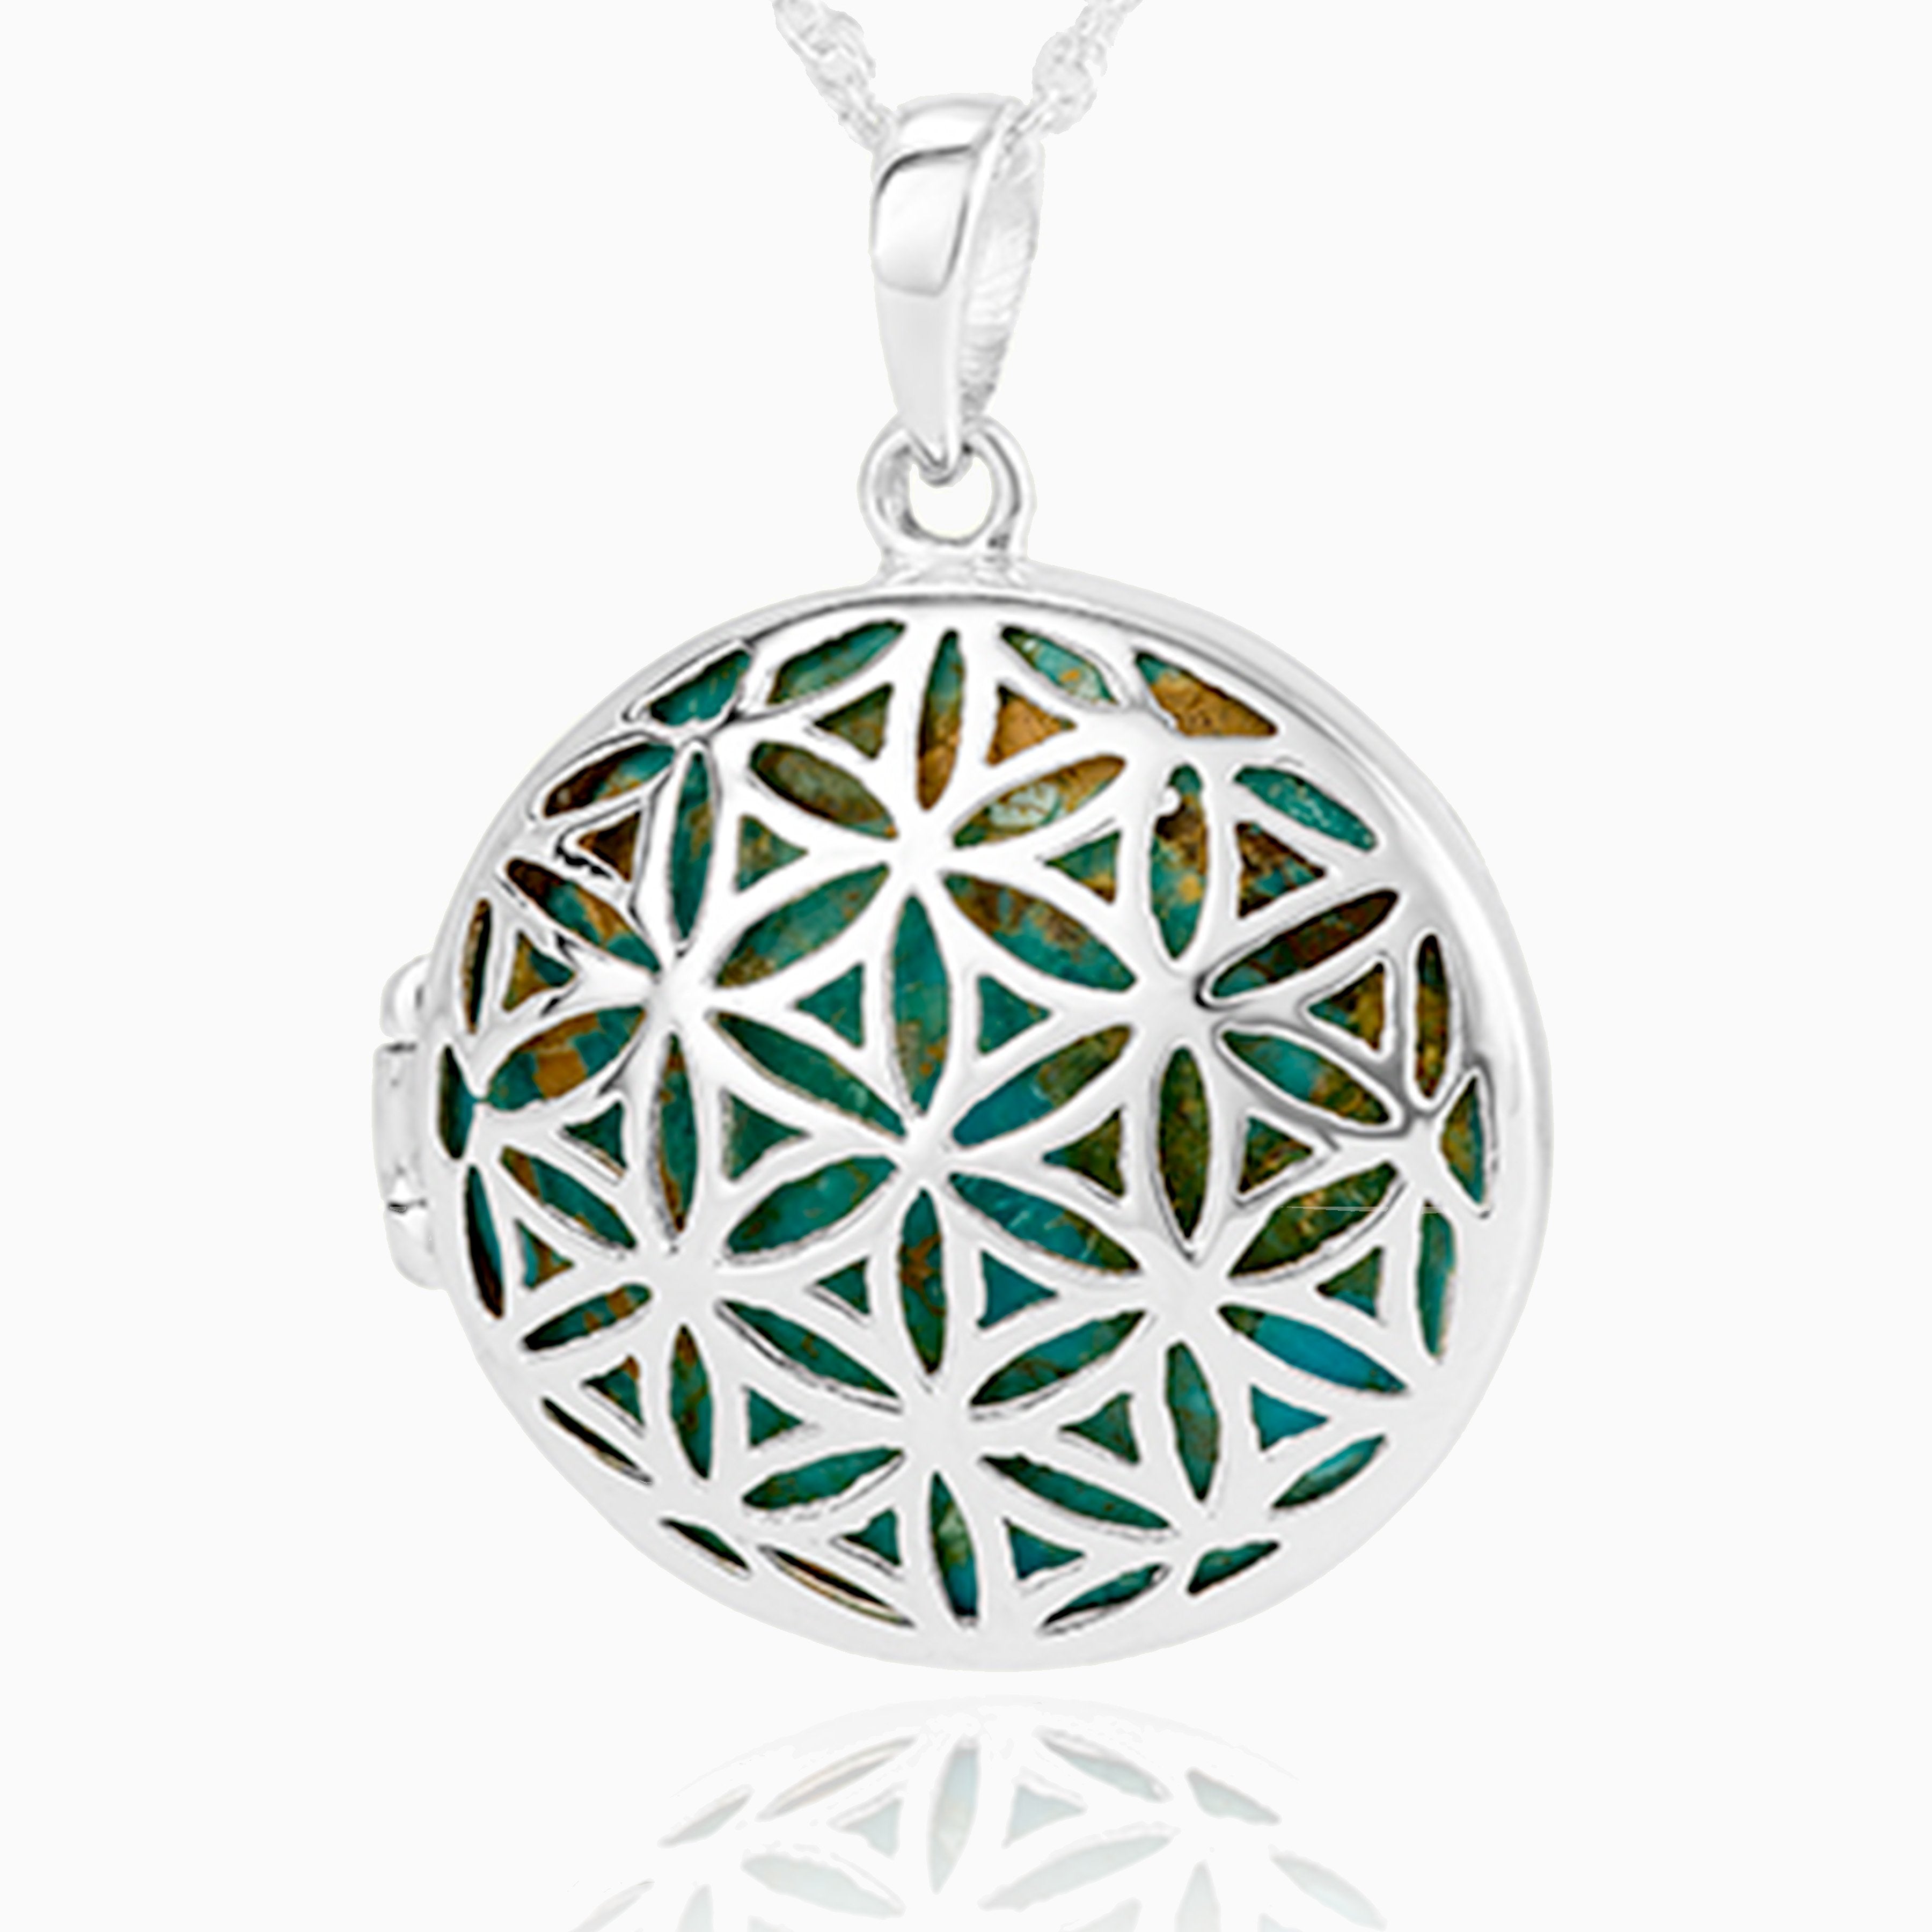 Product title: Contemporary Filigree Turquoise Locket, product type: 